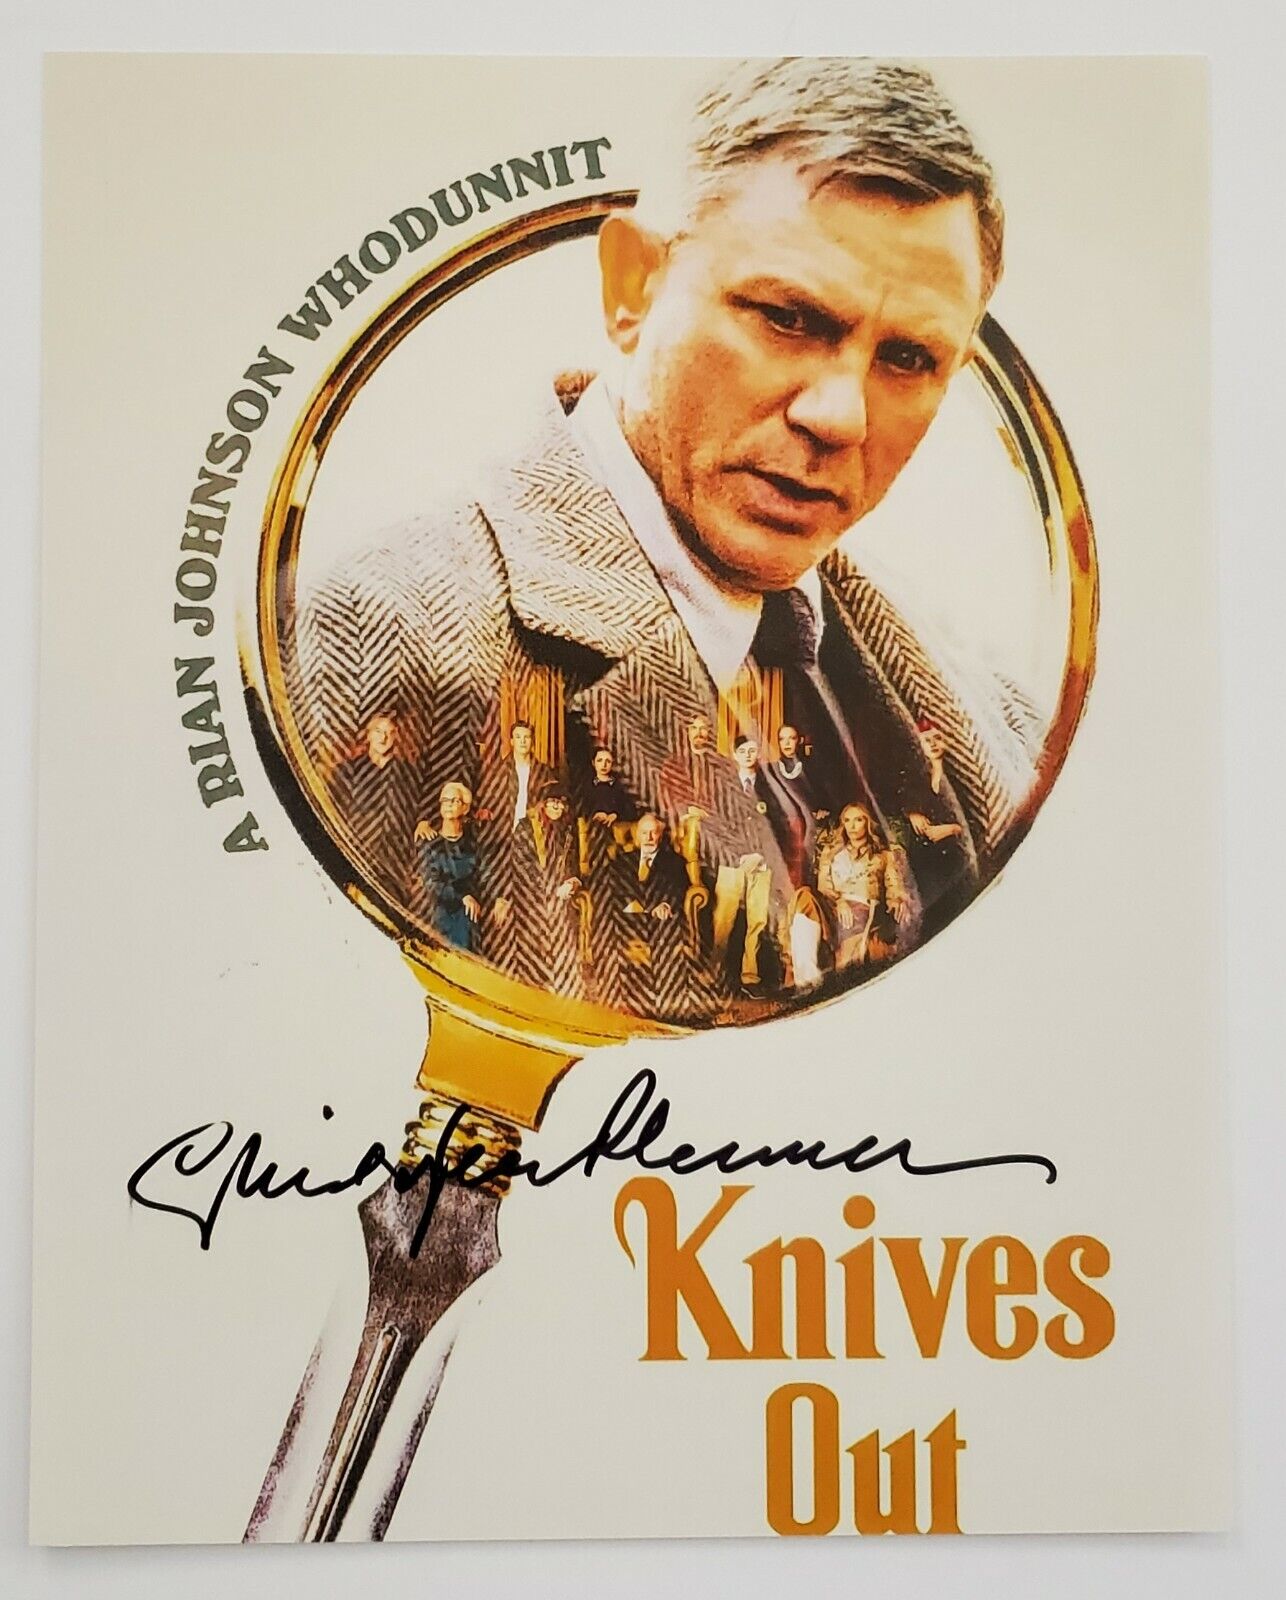 Christopher Plummer Signed Knives Out 8x10 Photo Poster painting Actor Sound Of Music Up RAD